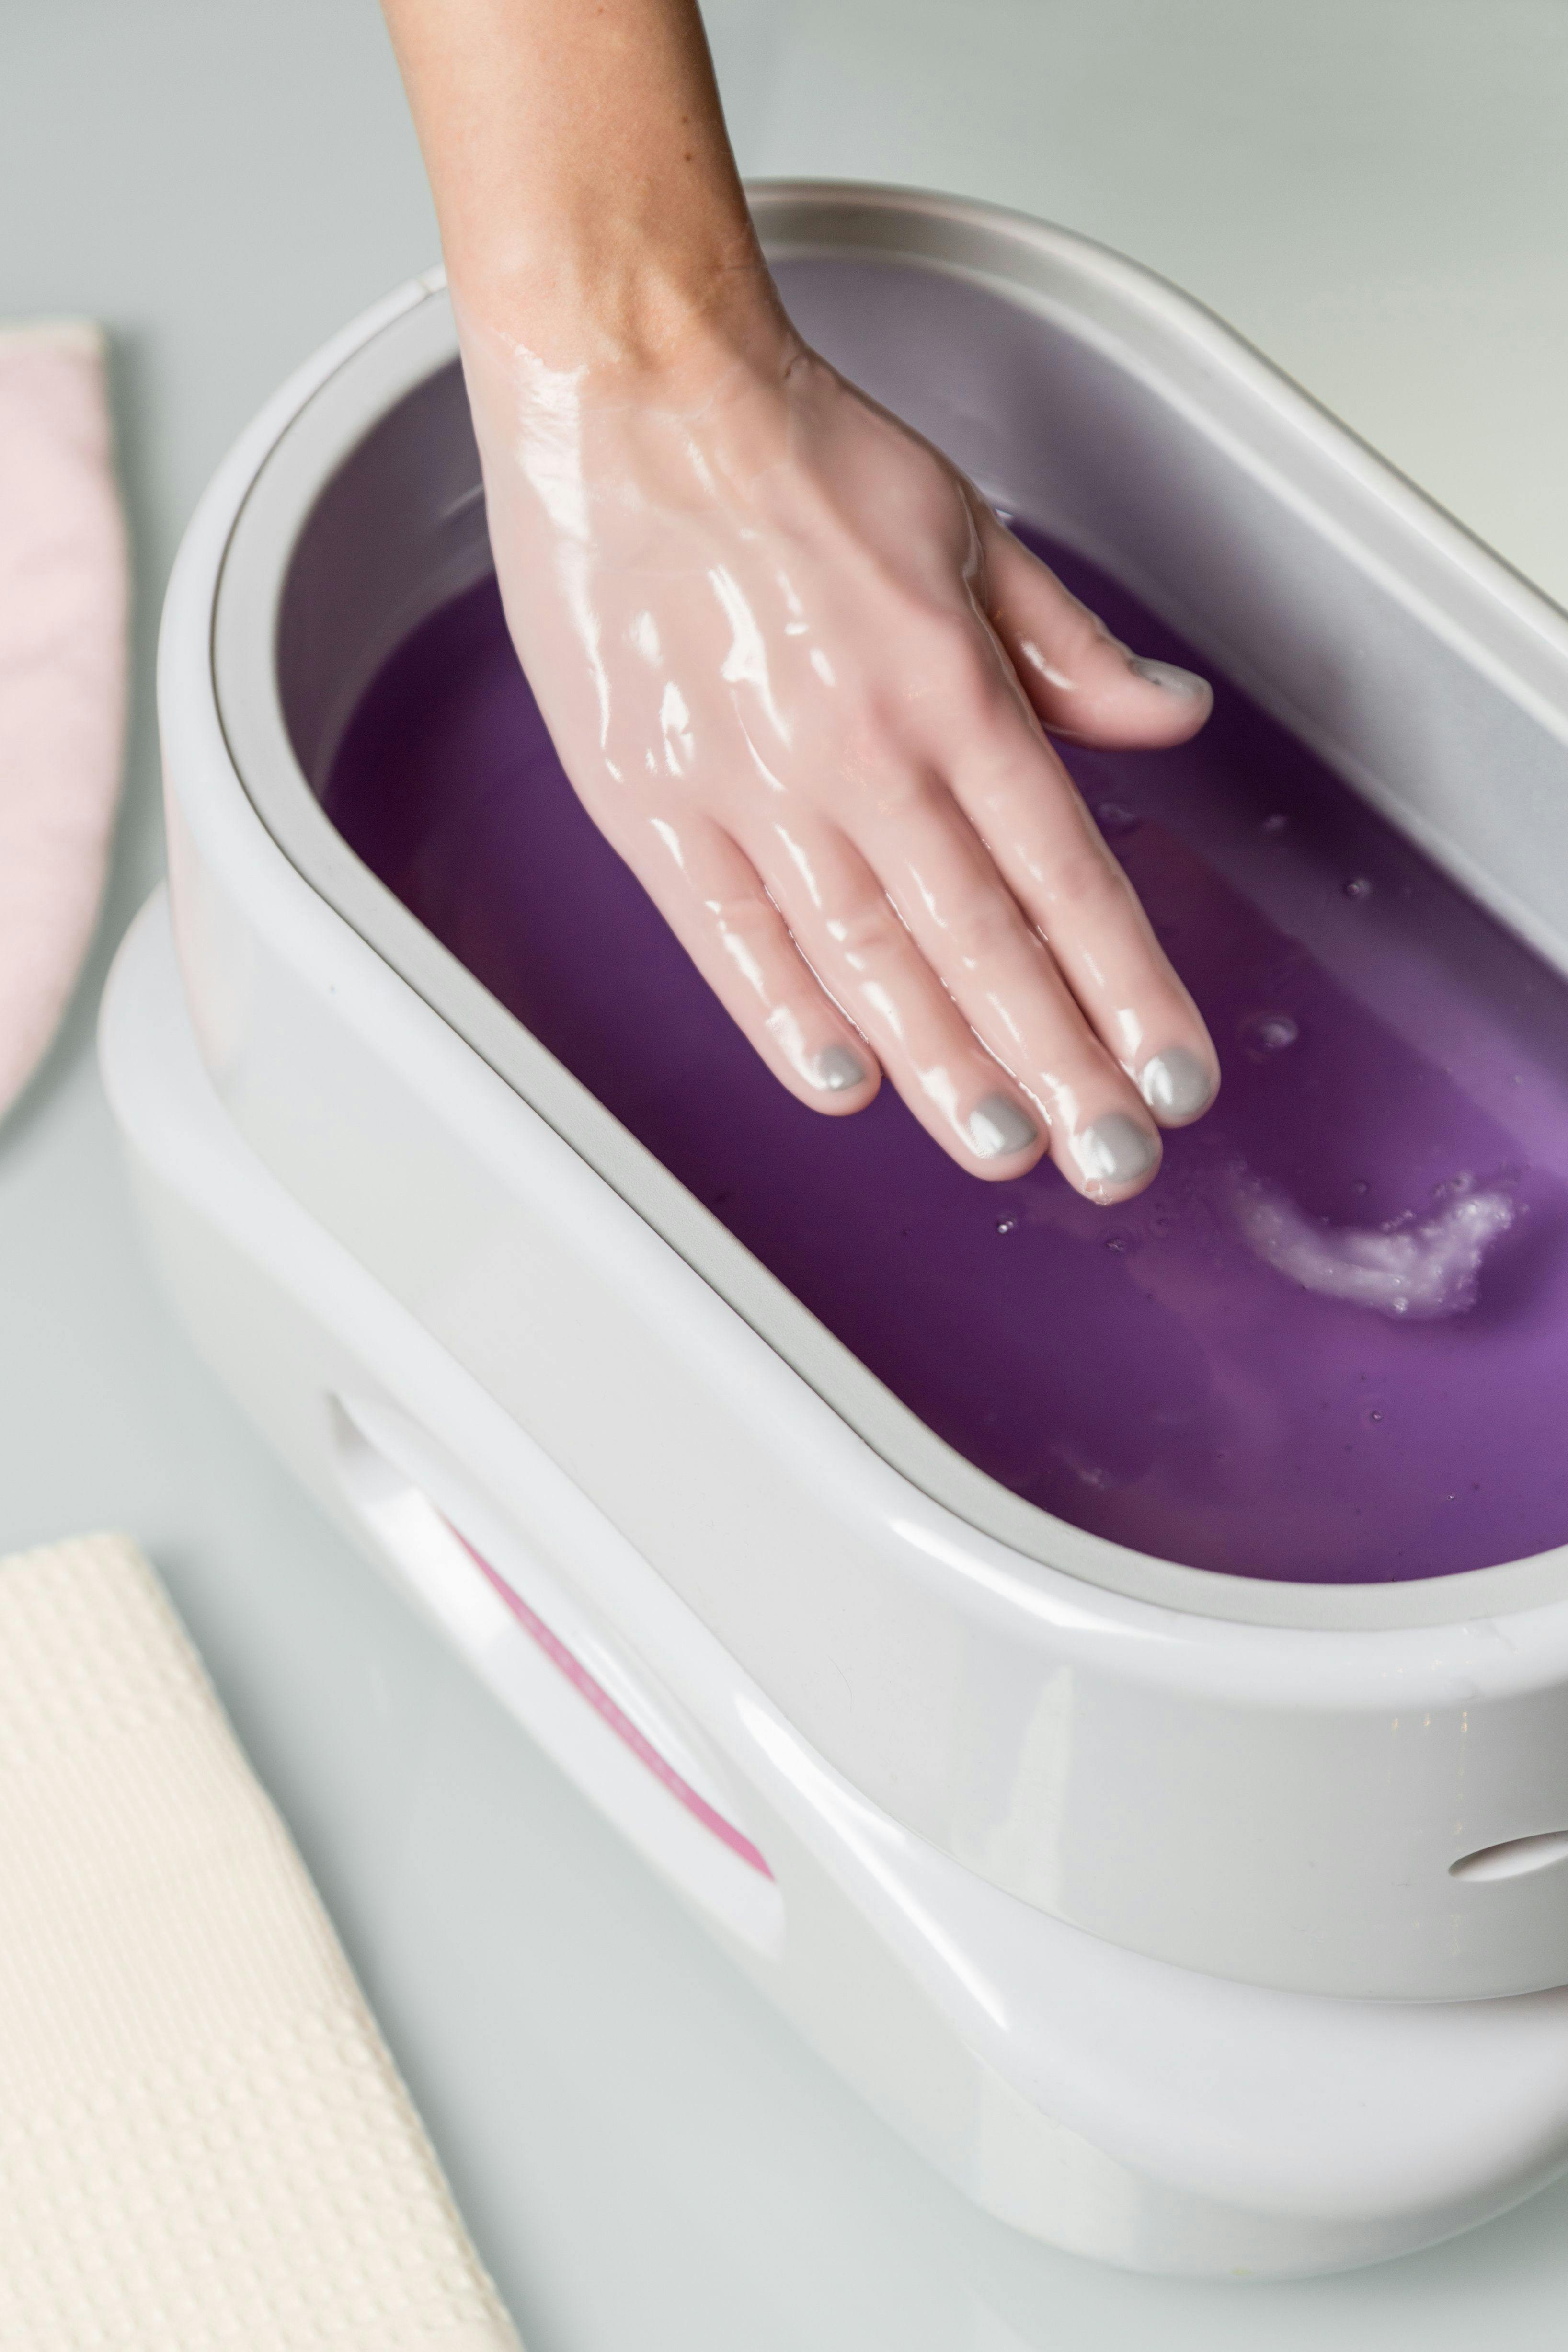 A paraffin wax bath for hands can lock in moisture for patients if used 1-2 times a week. Volodymyr Herasymov/Adobe Stock